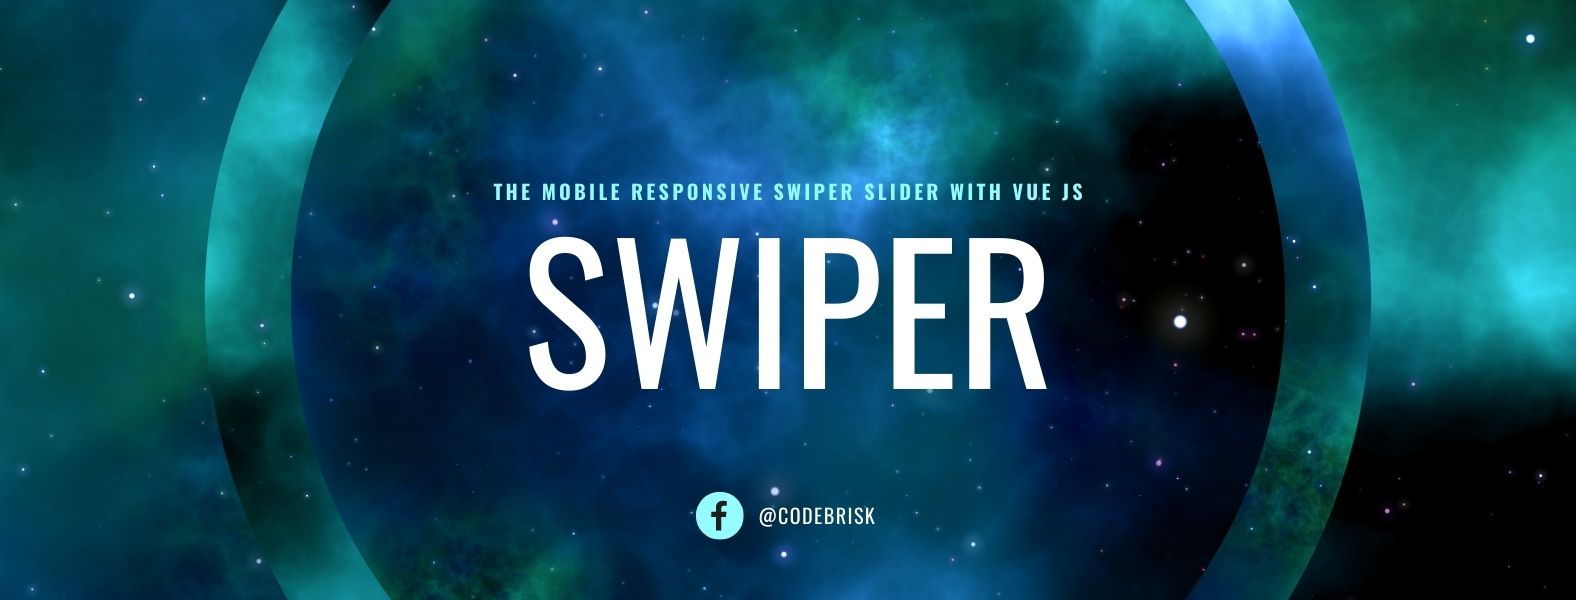 The Mobile Responsive Swiper Slider with Vue Js cover image